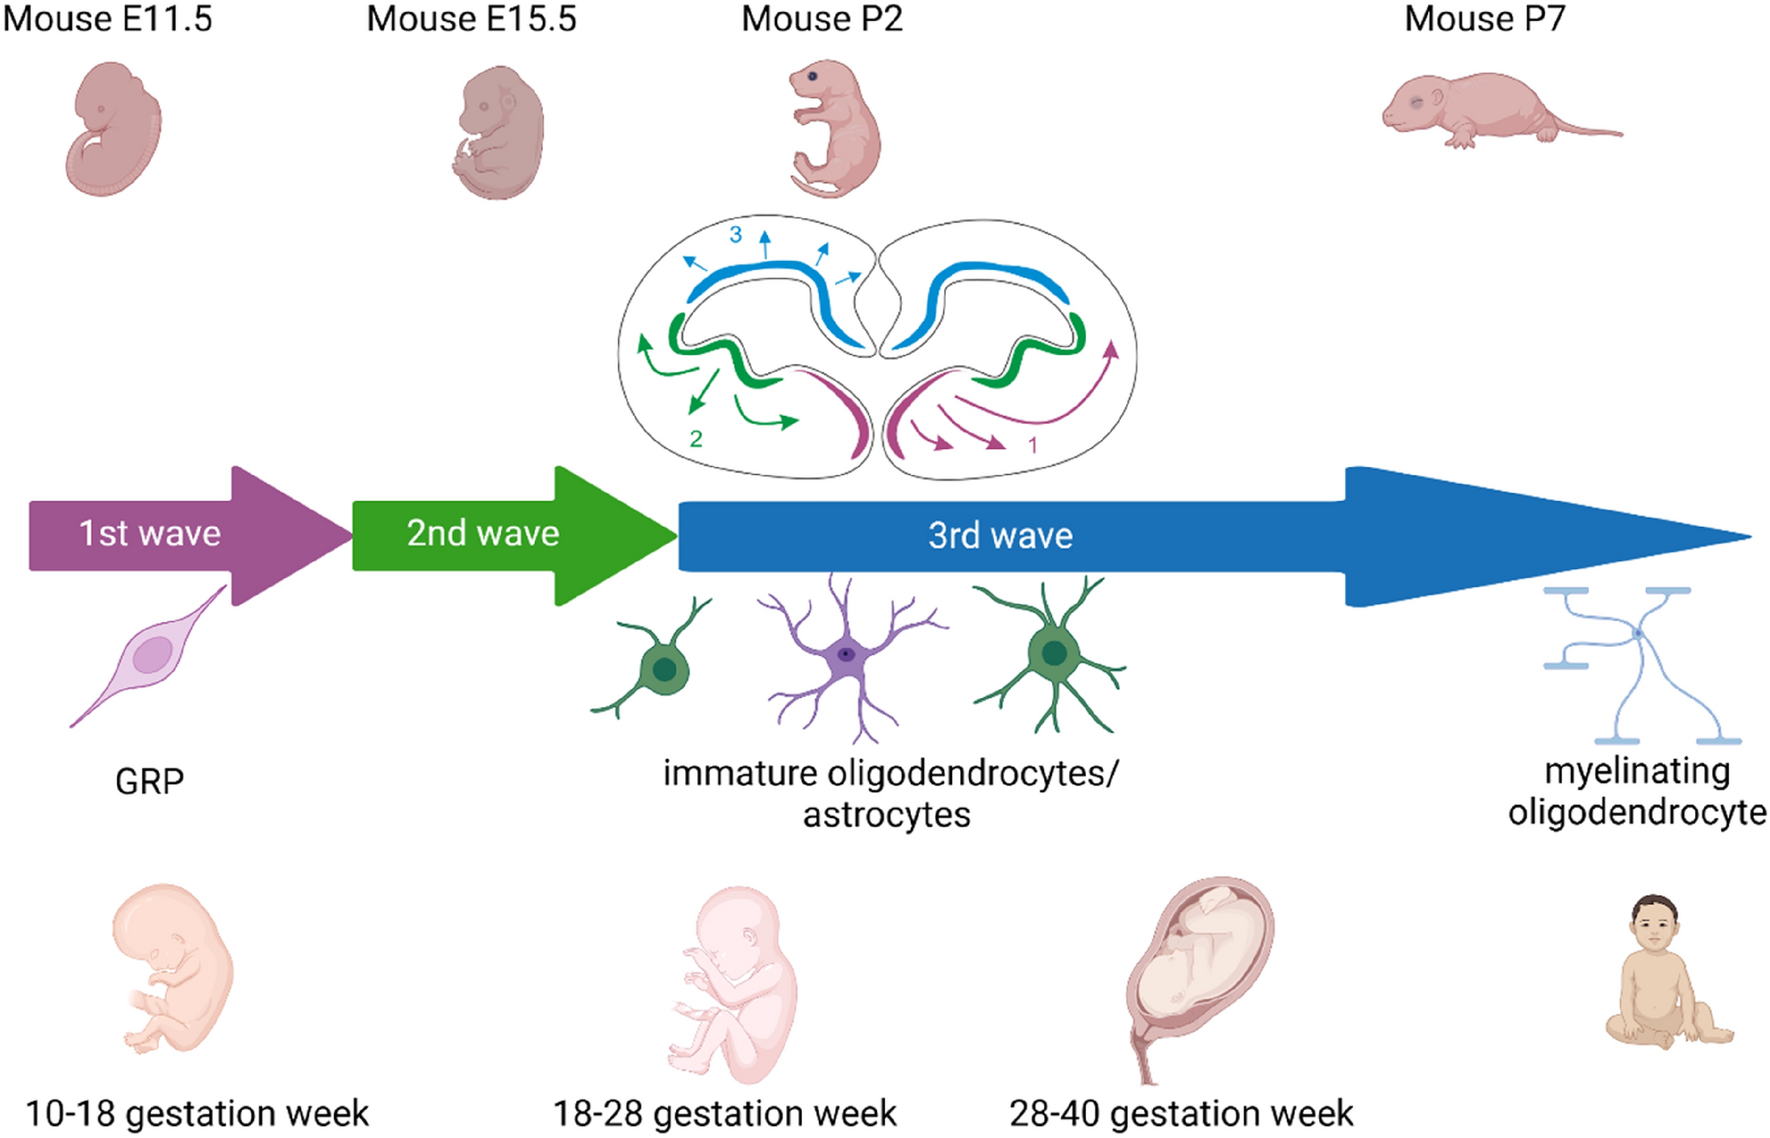 Glial-restricted progenitor cells: a cure for diseased brain?